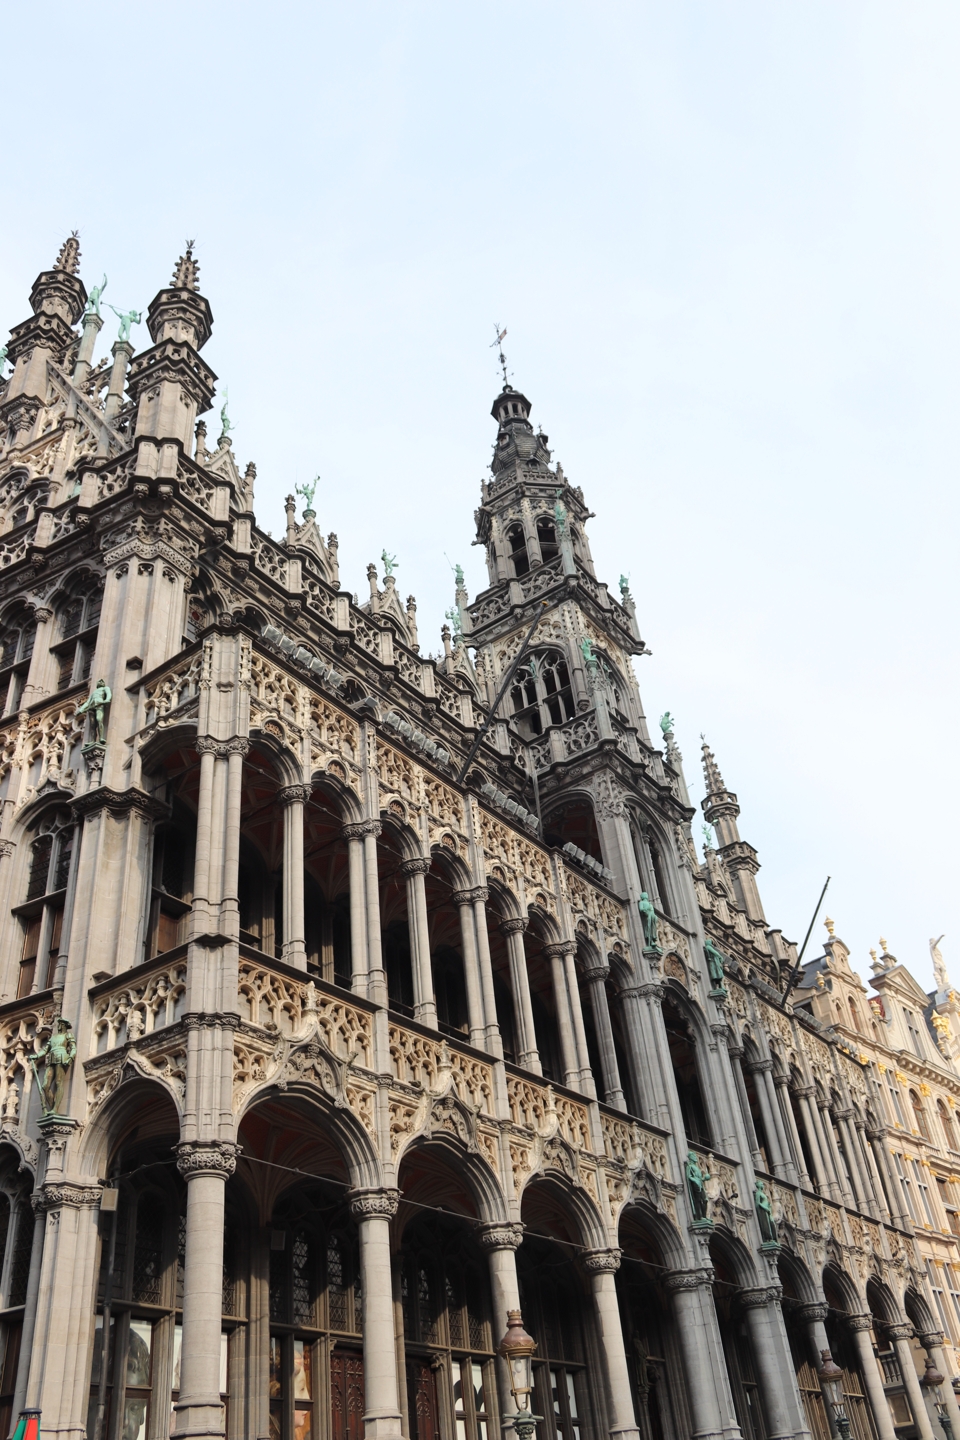 Building at the Grand Place in Brussels